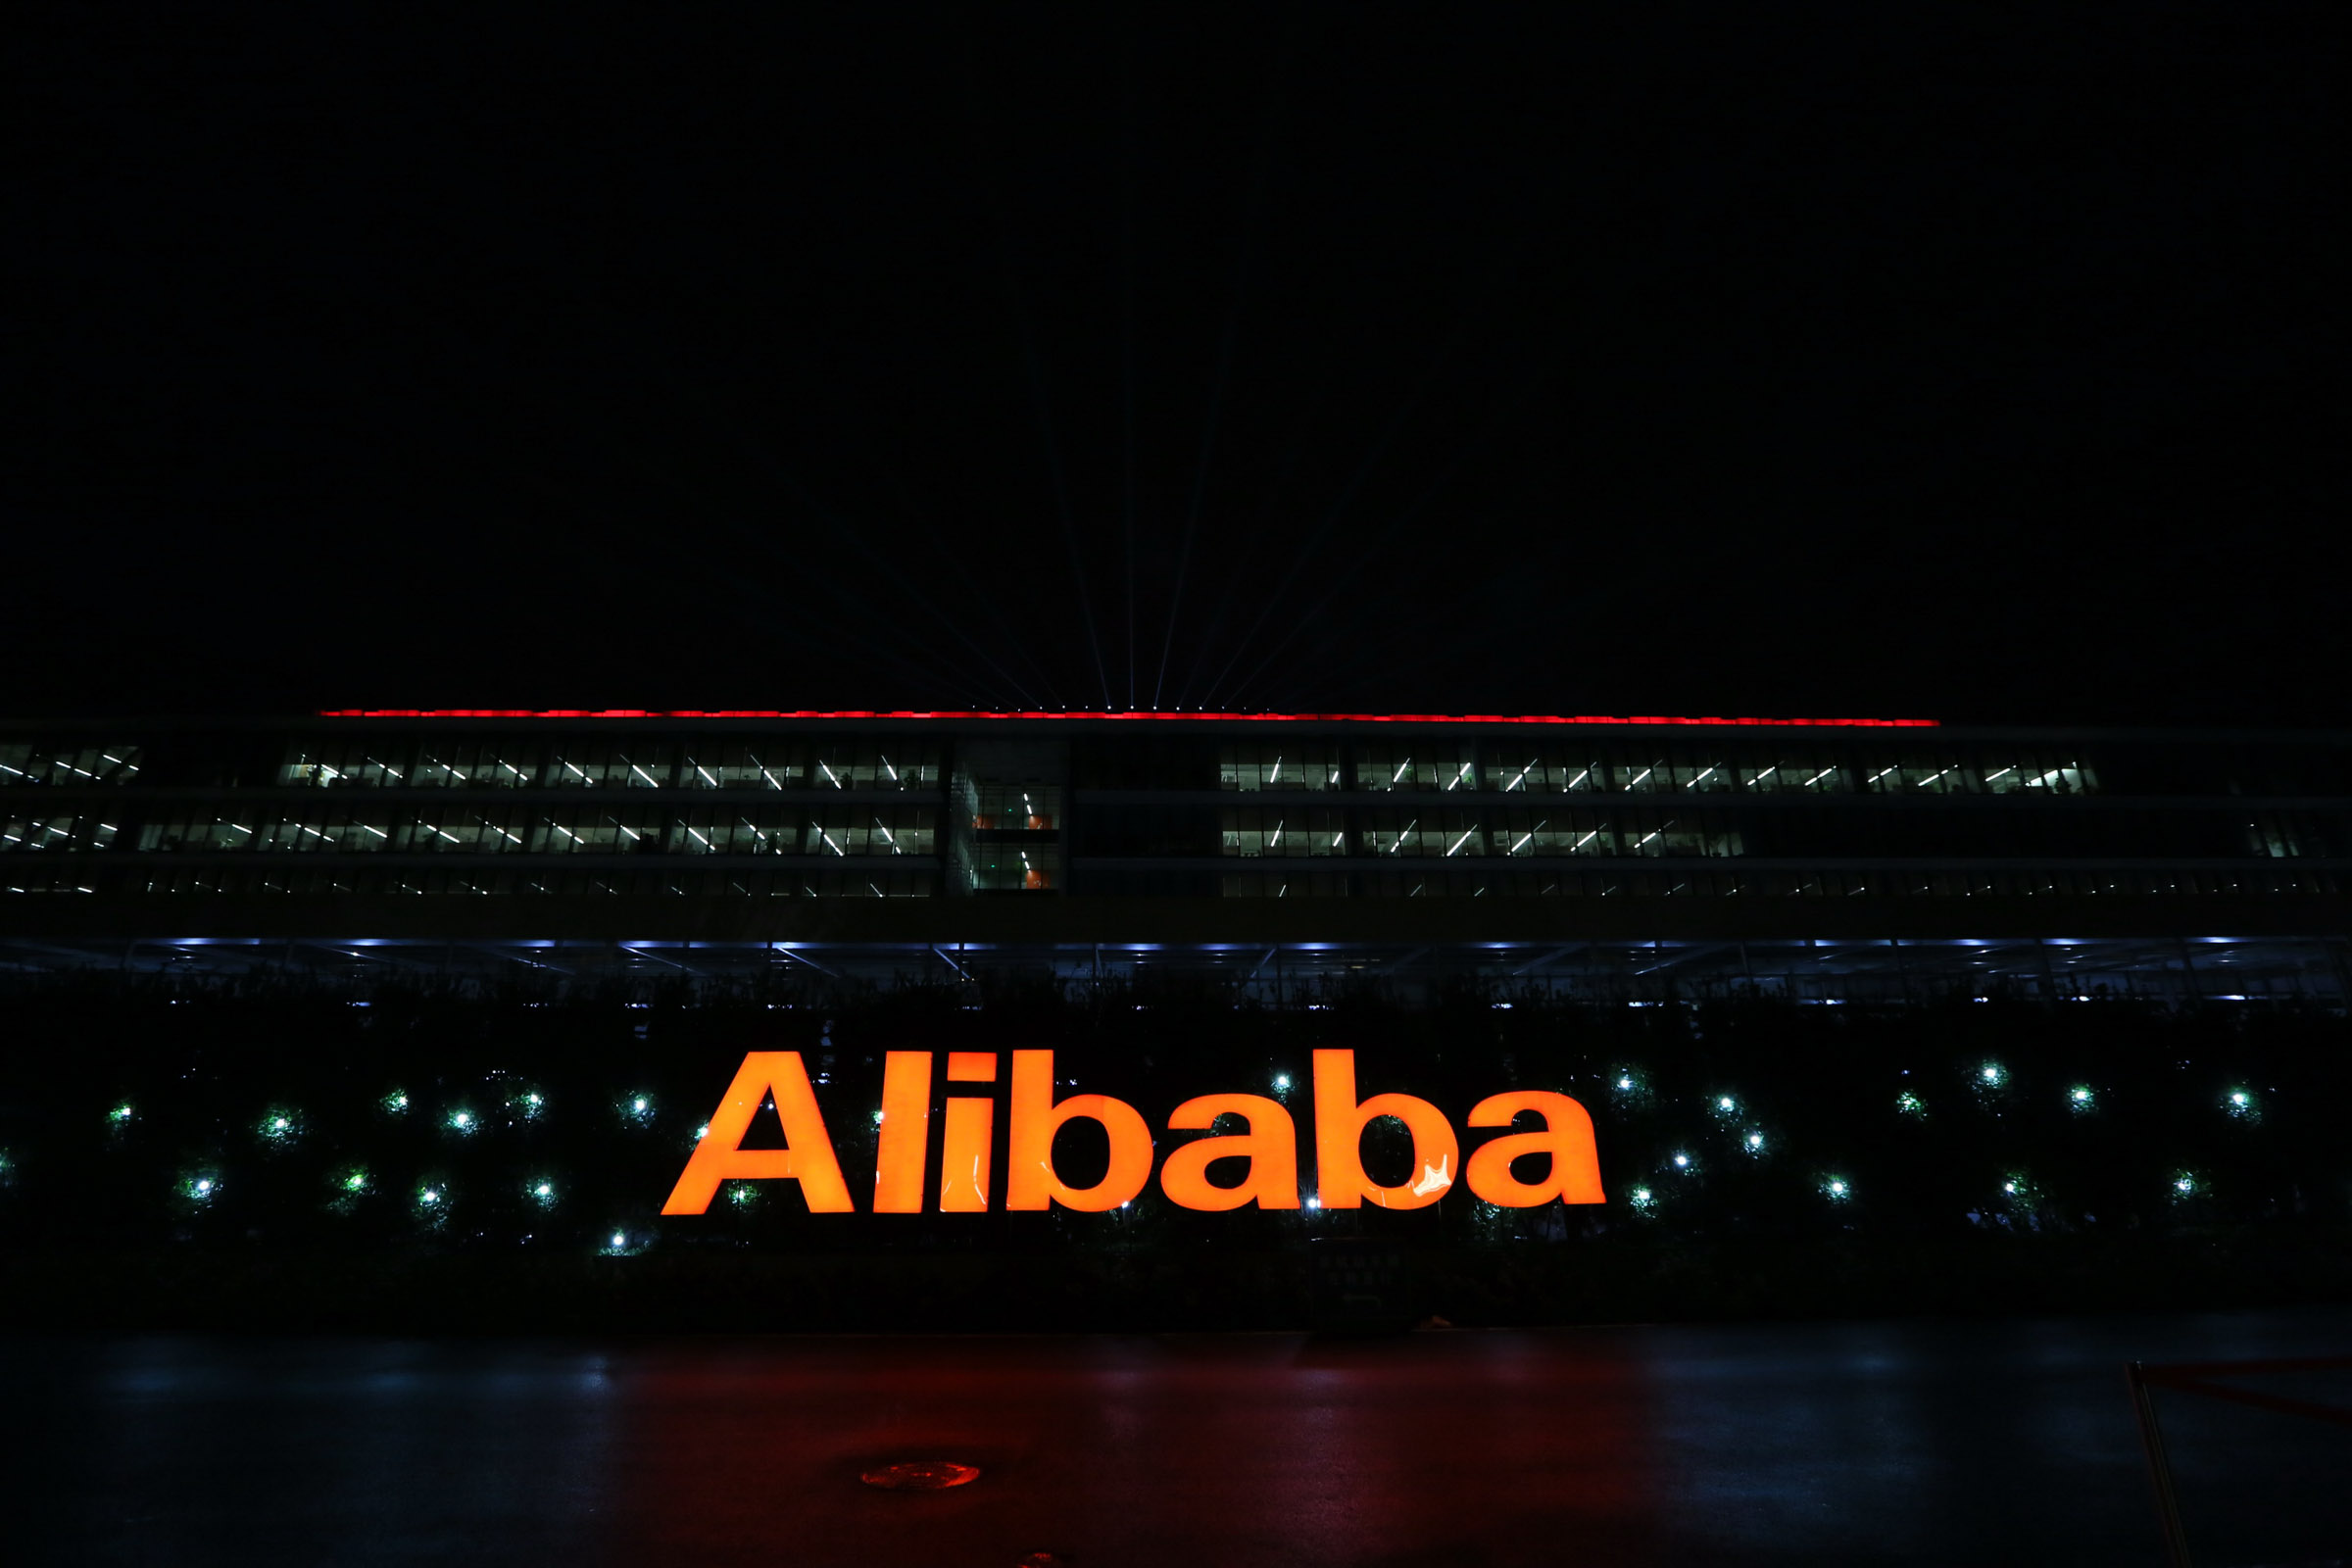 Alibaba partners with Kuehne + Nagel in global logistics services